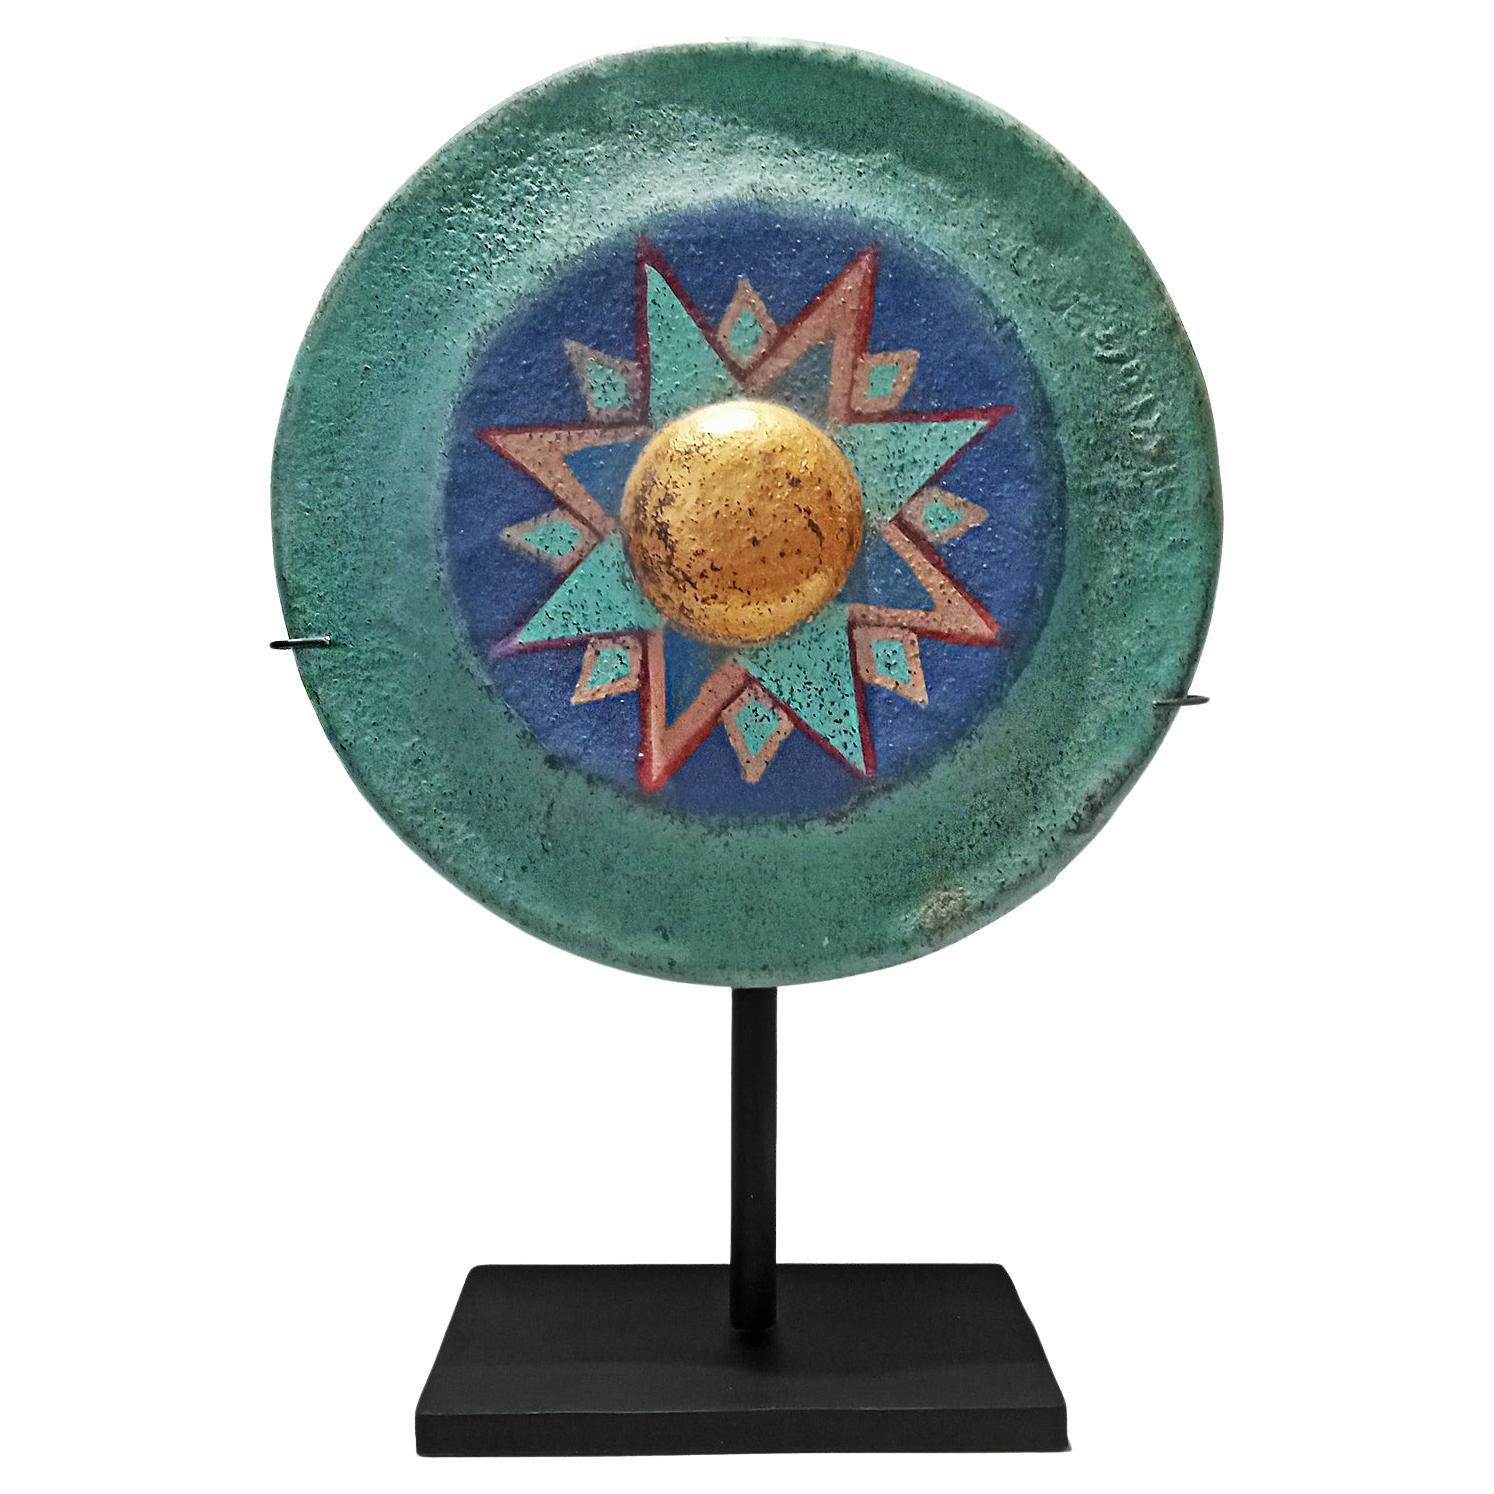 Painted Indonesian Gong on Stand, mid-20th Century